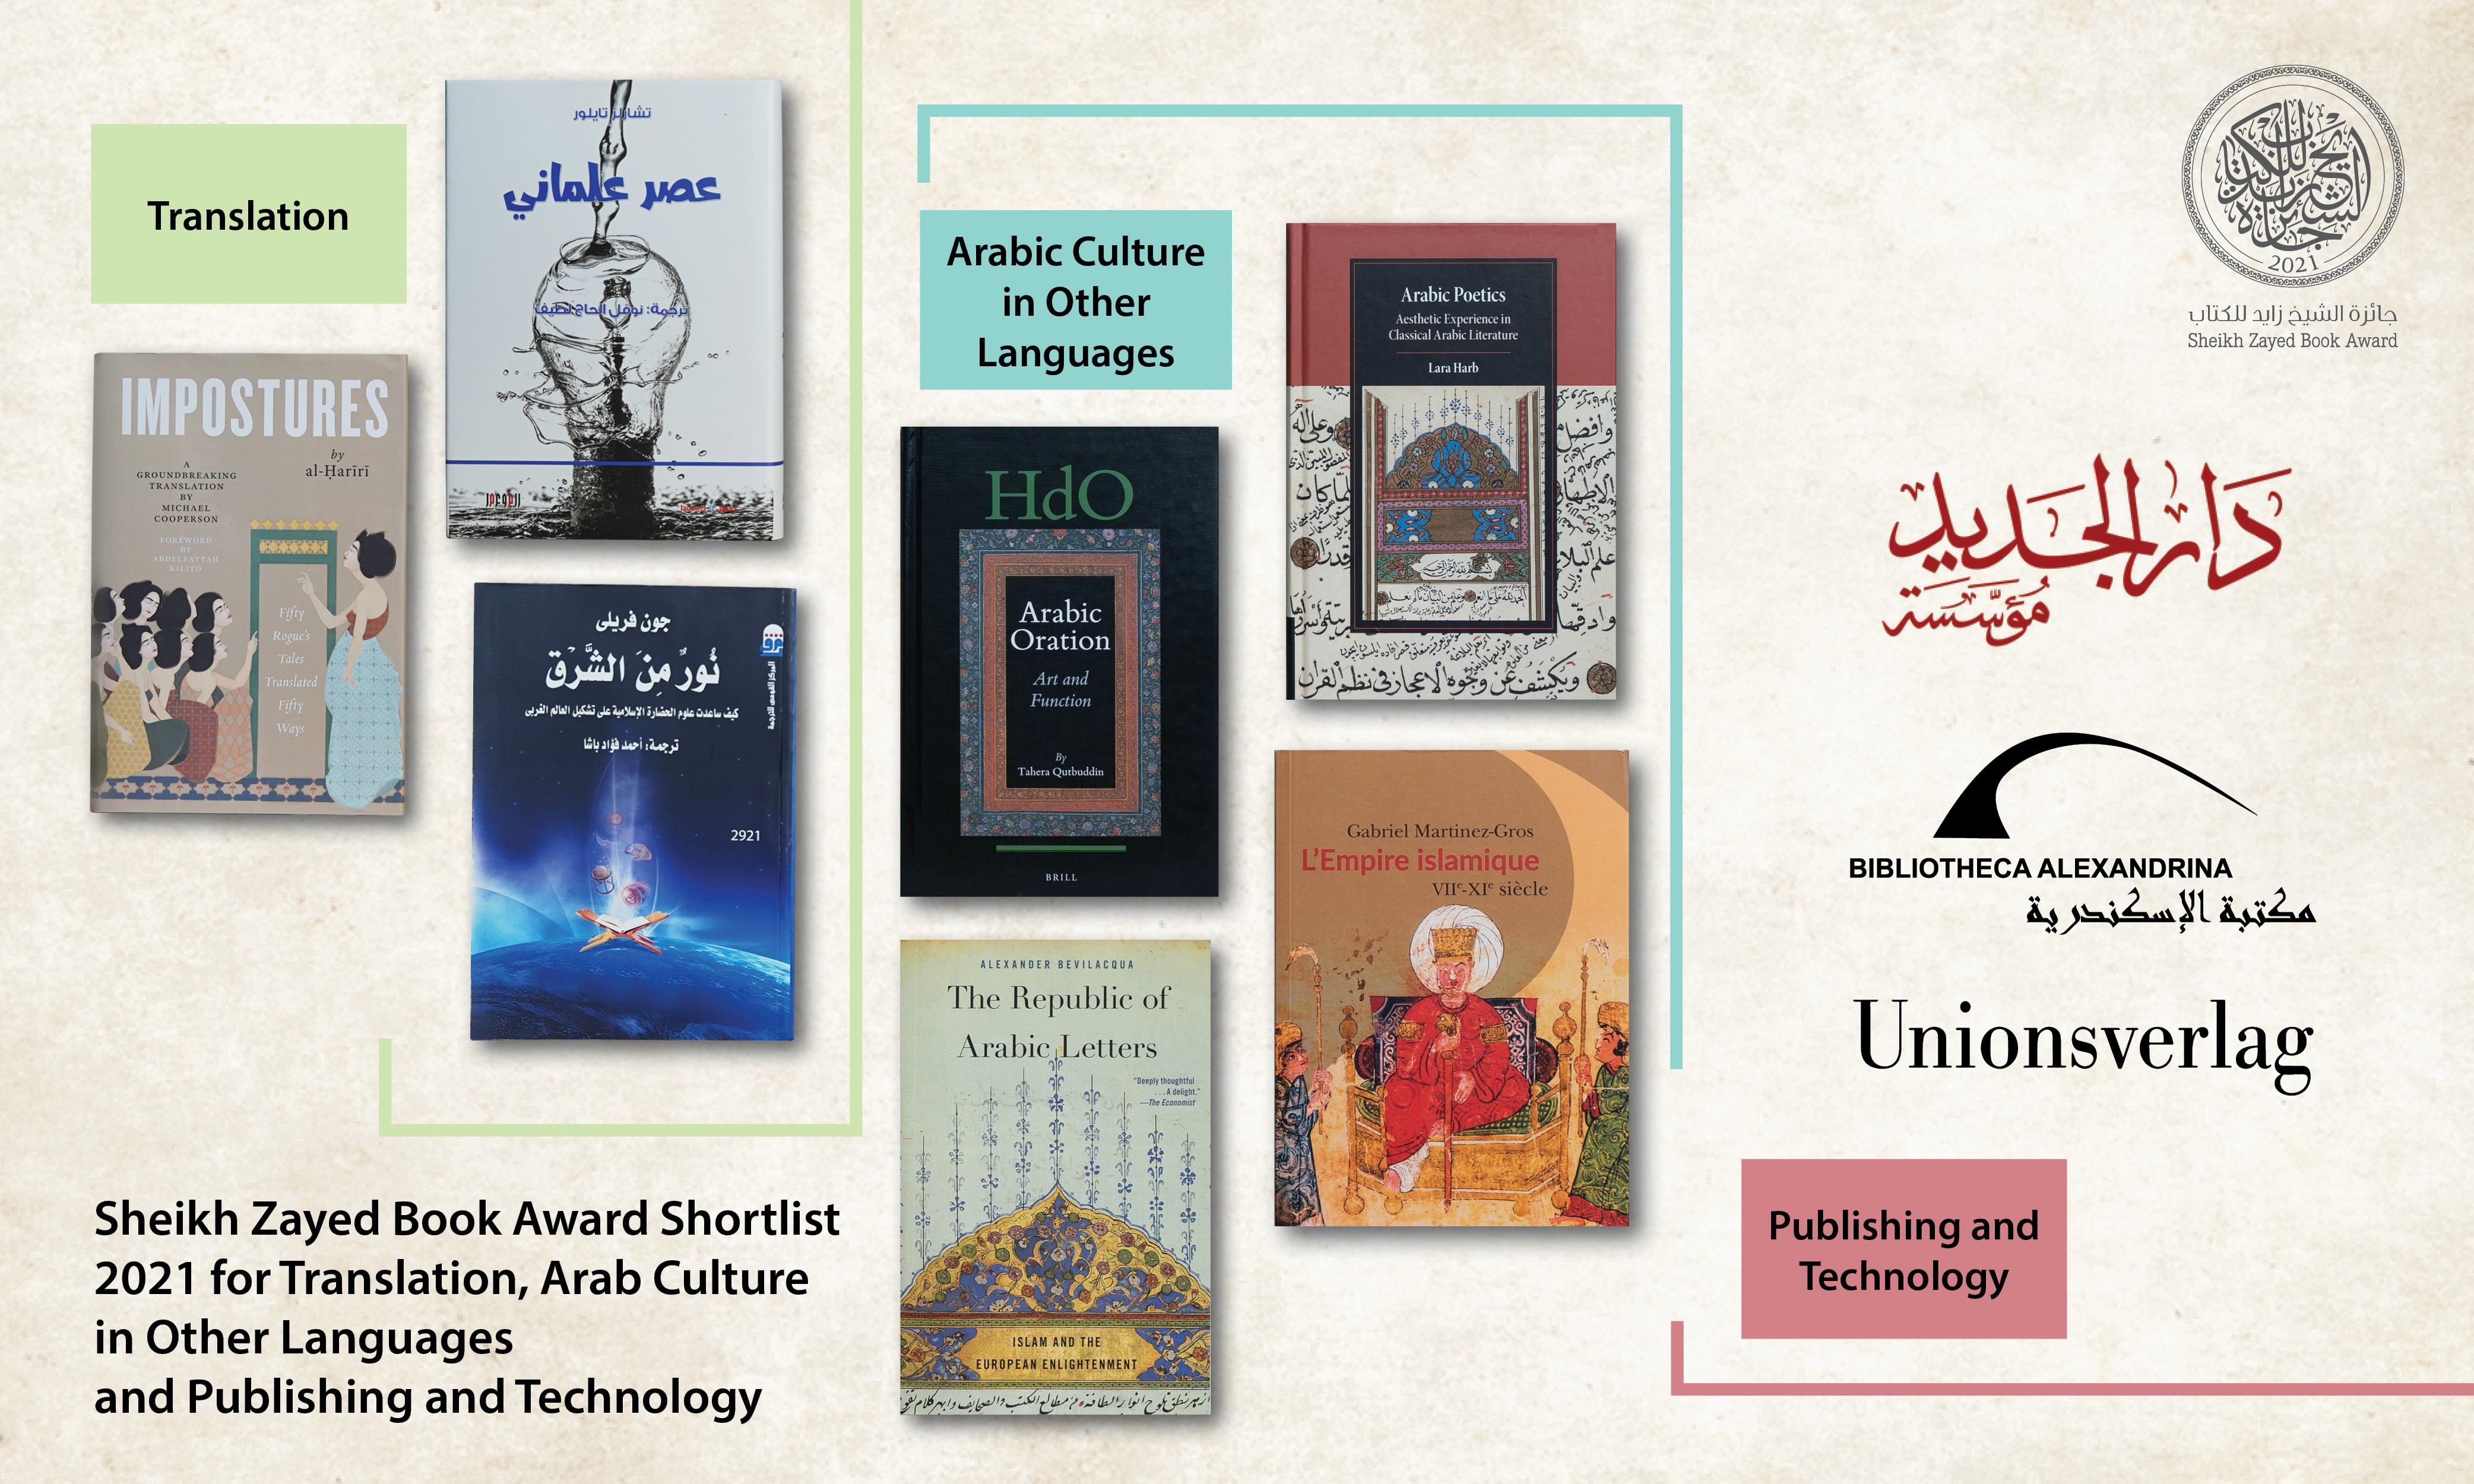 Sheikh Zayed Book Award Reveals Shortlists For ‘Arab Culture In Other Languages’, ‘Translation’ And ‘Publishing And Technology’ Categories